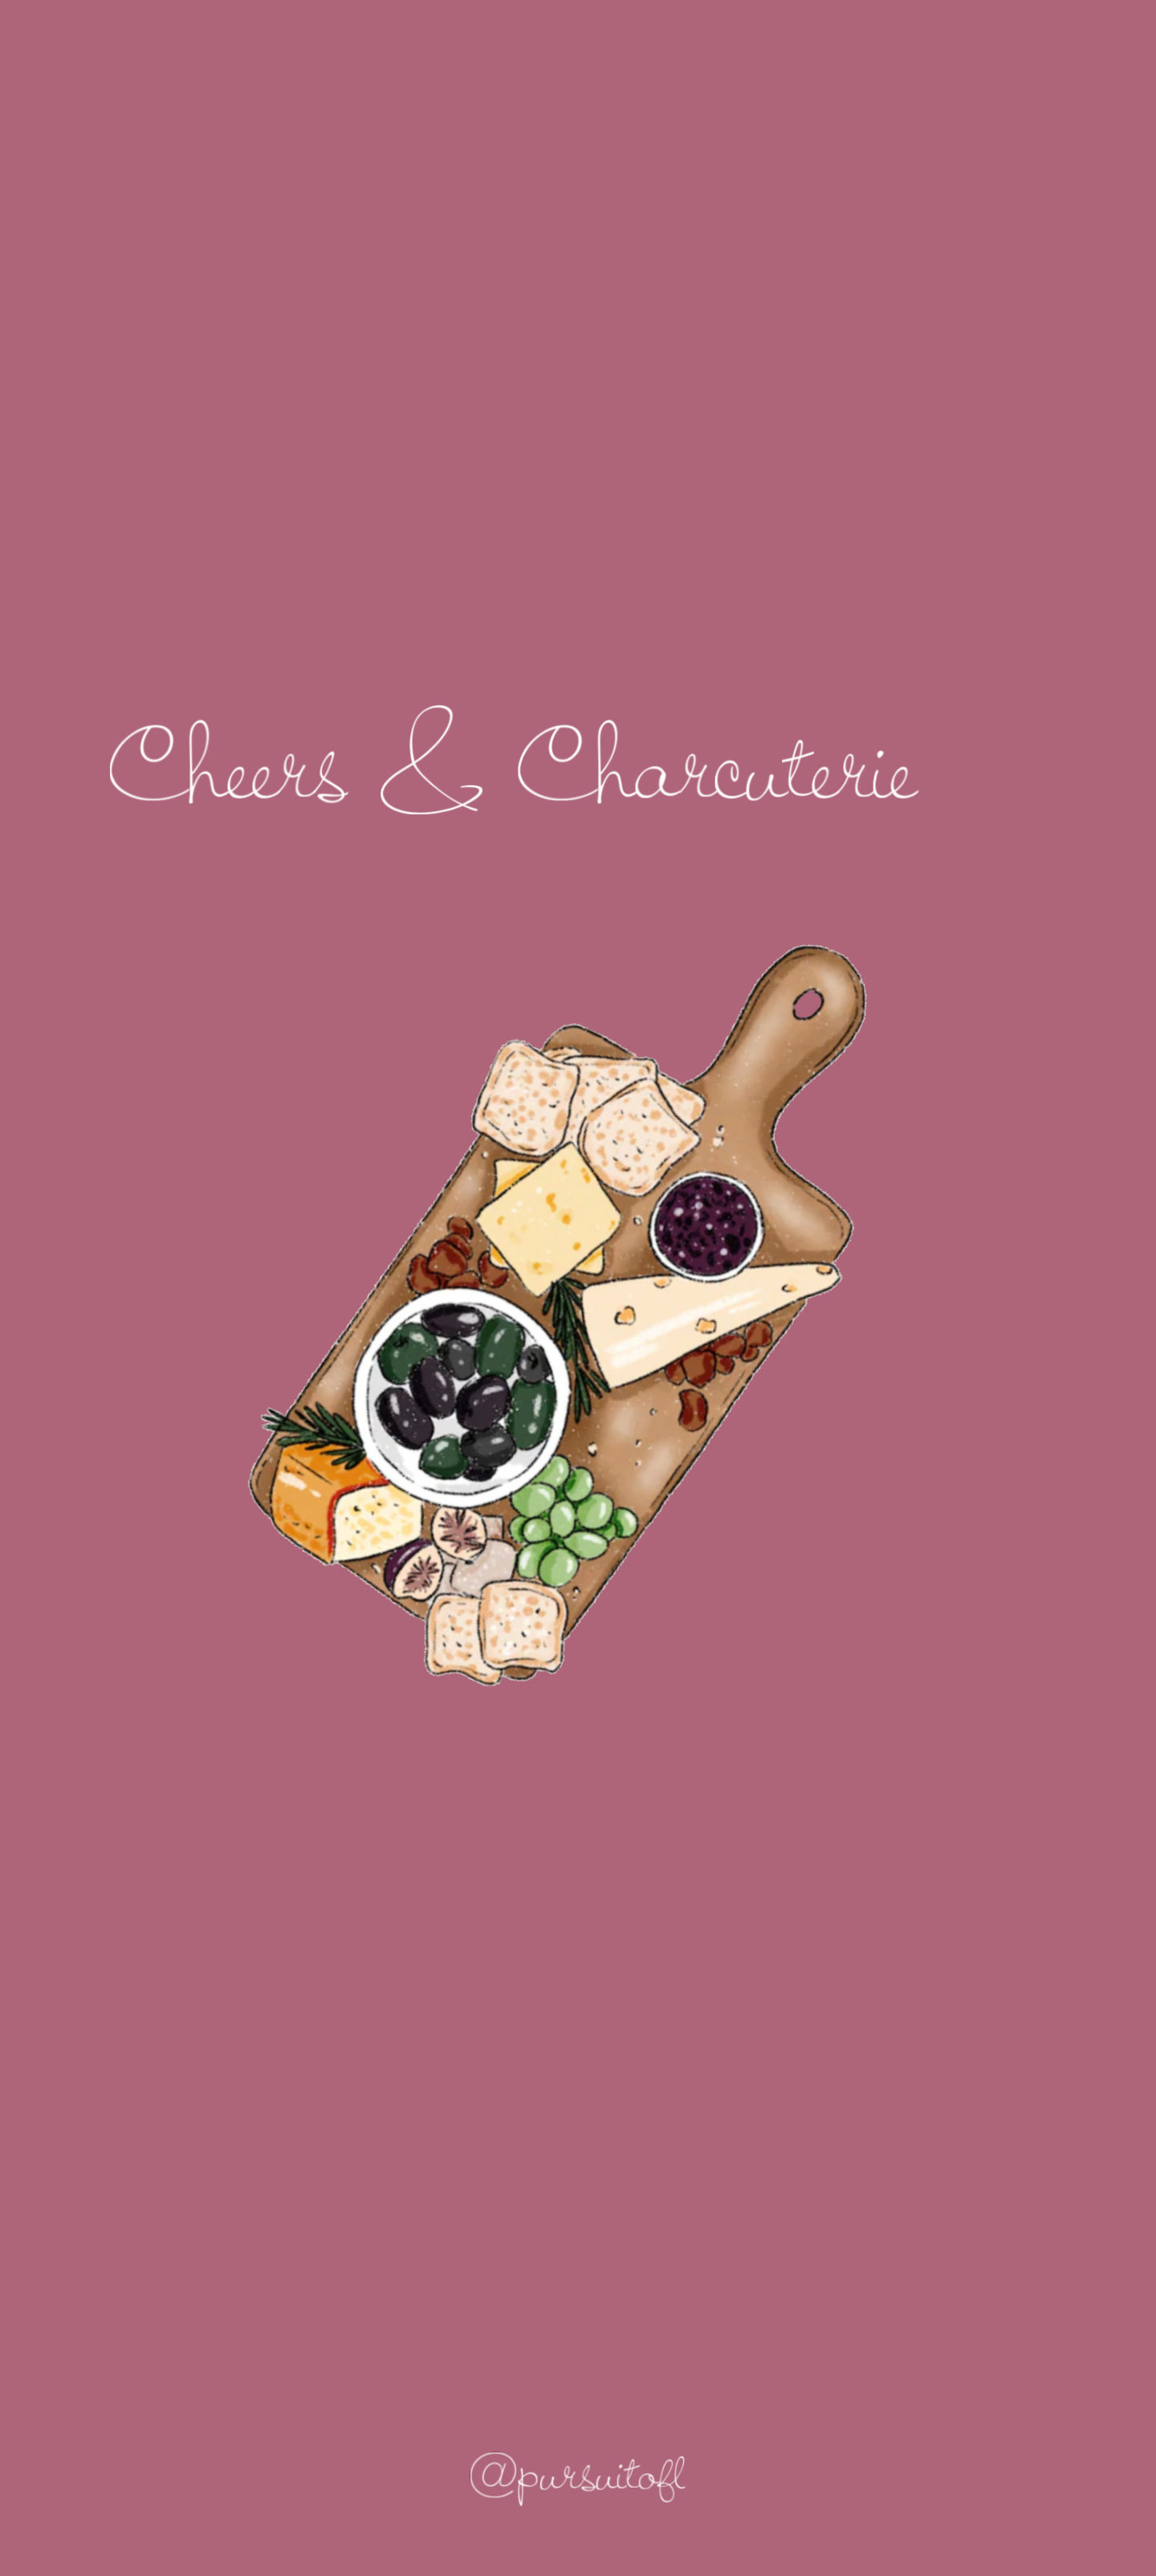 Mauve phone wallpaper with charcuterie board illustration and Cheers & Charcuterie text